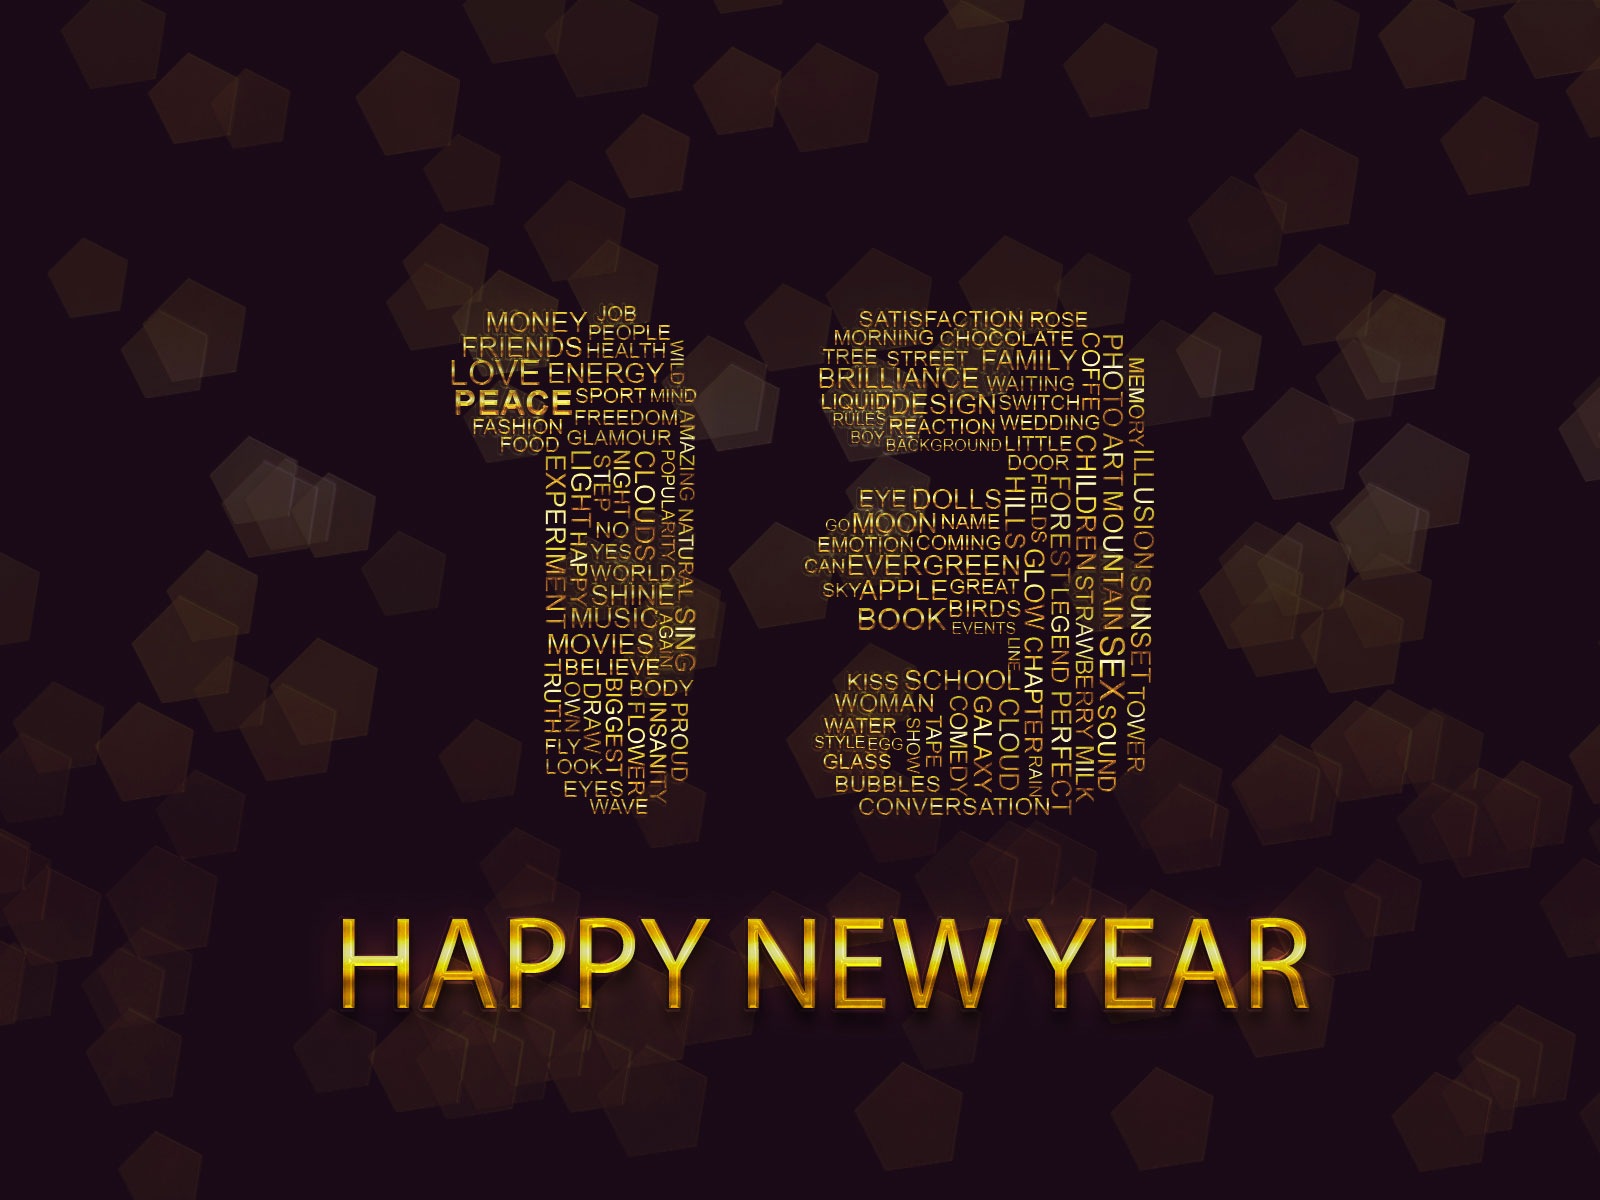 2013 Happy New Year HD wallpapers #12 - 1600x1200